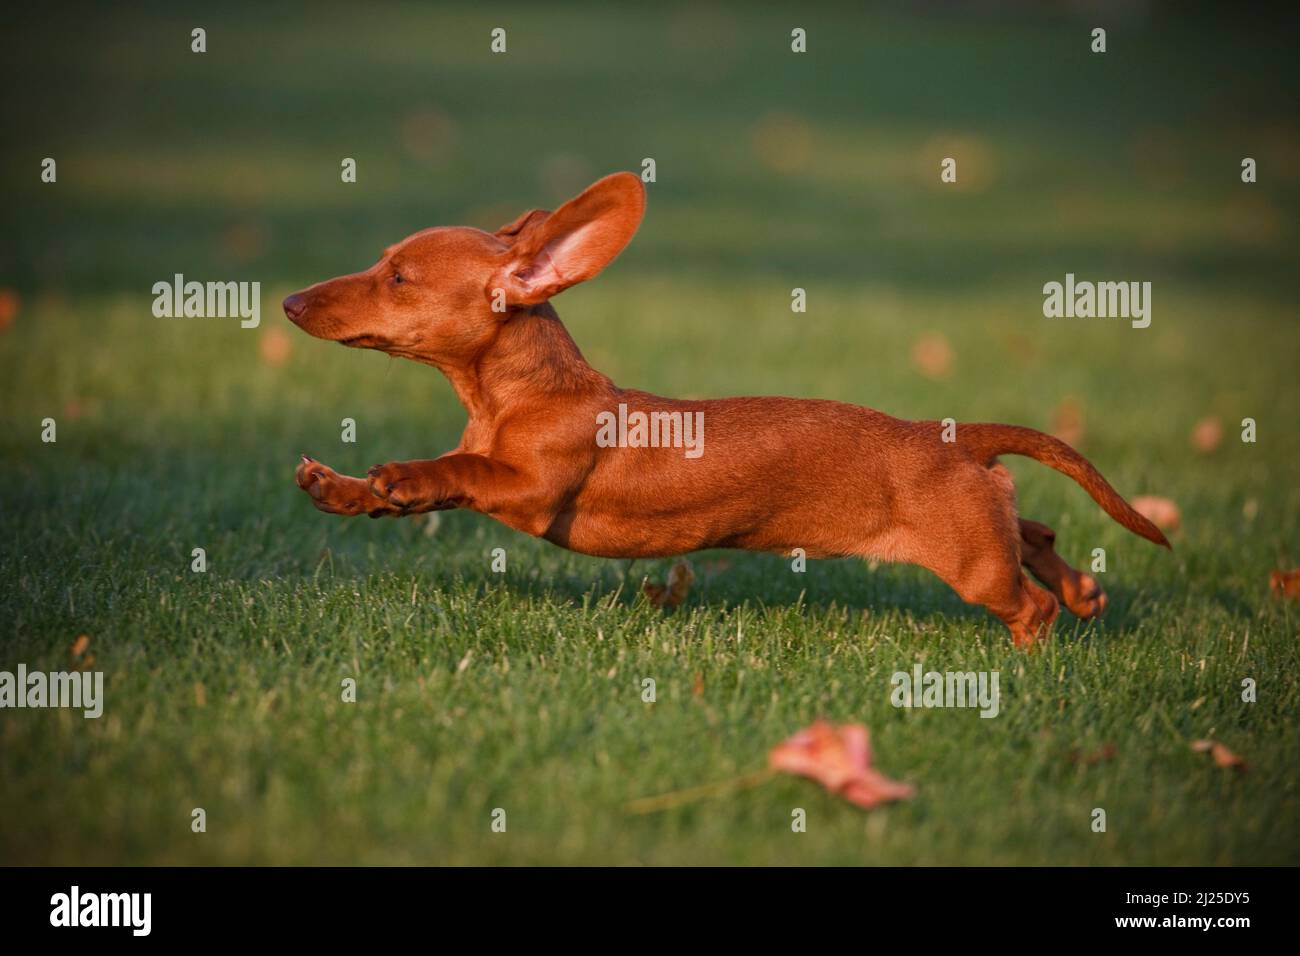 Smooth Dachshund. Adult dog running on a lawn. Germany Stock Photo